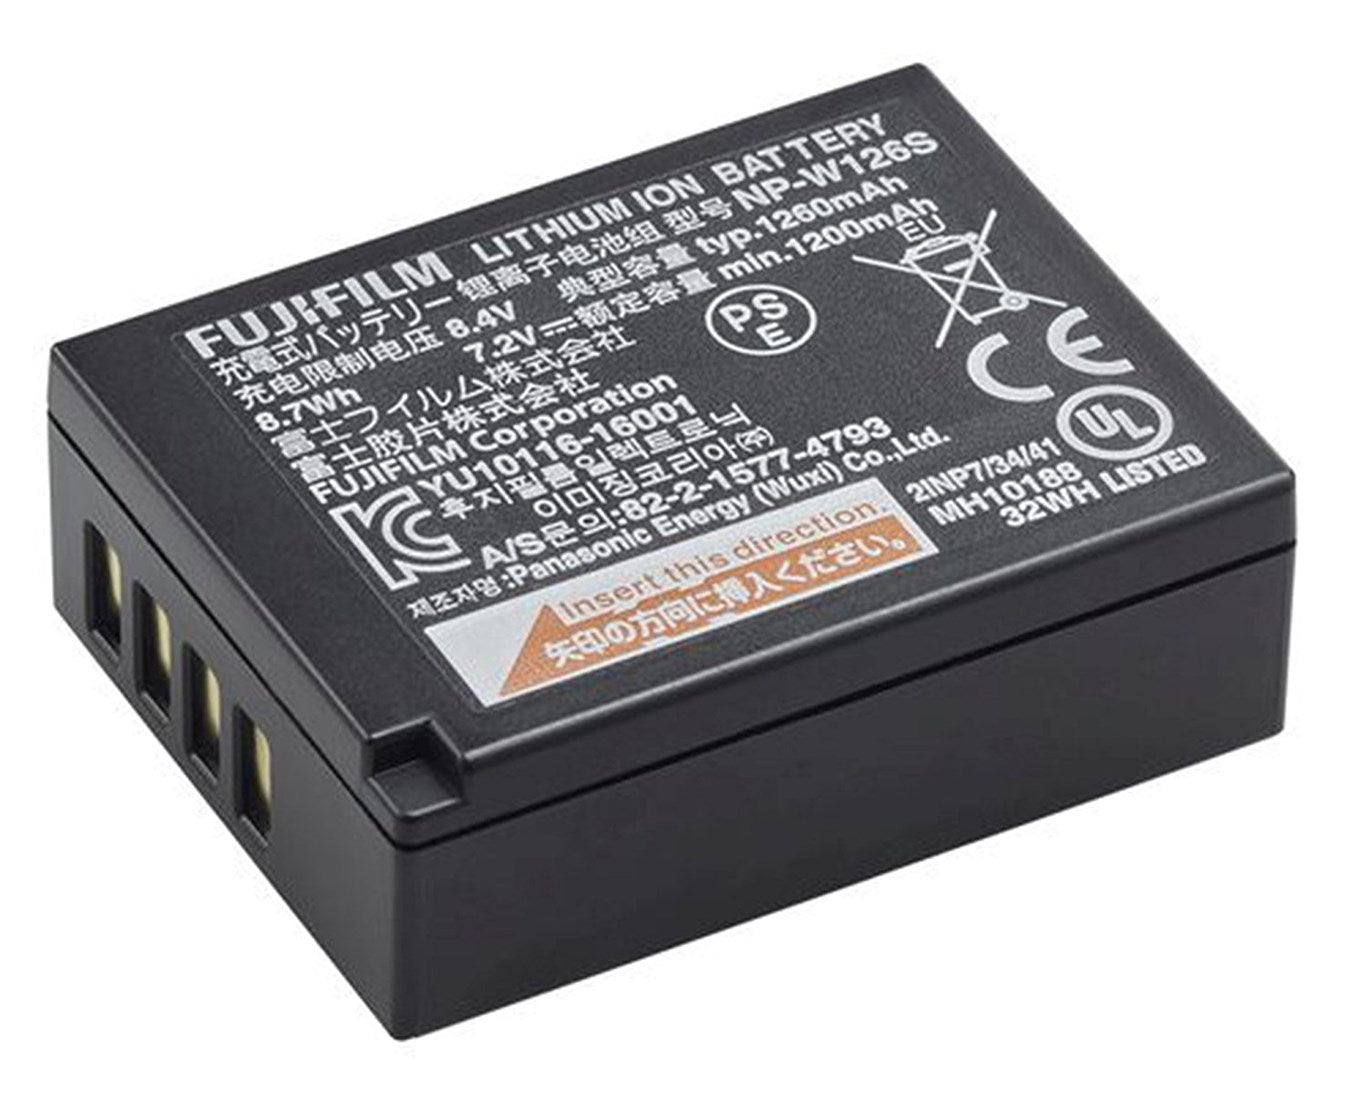 Product Image of Fujifilm NP-W126S Lithium-Ion Rechargeable Battery - Black